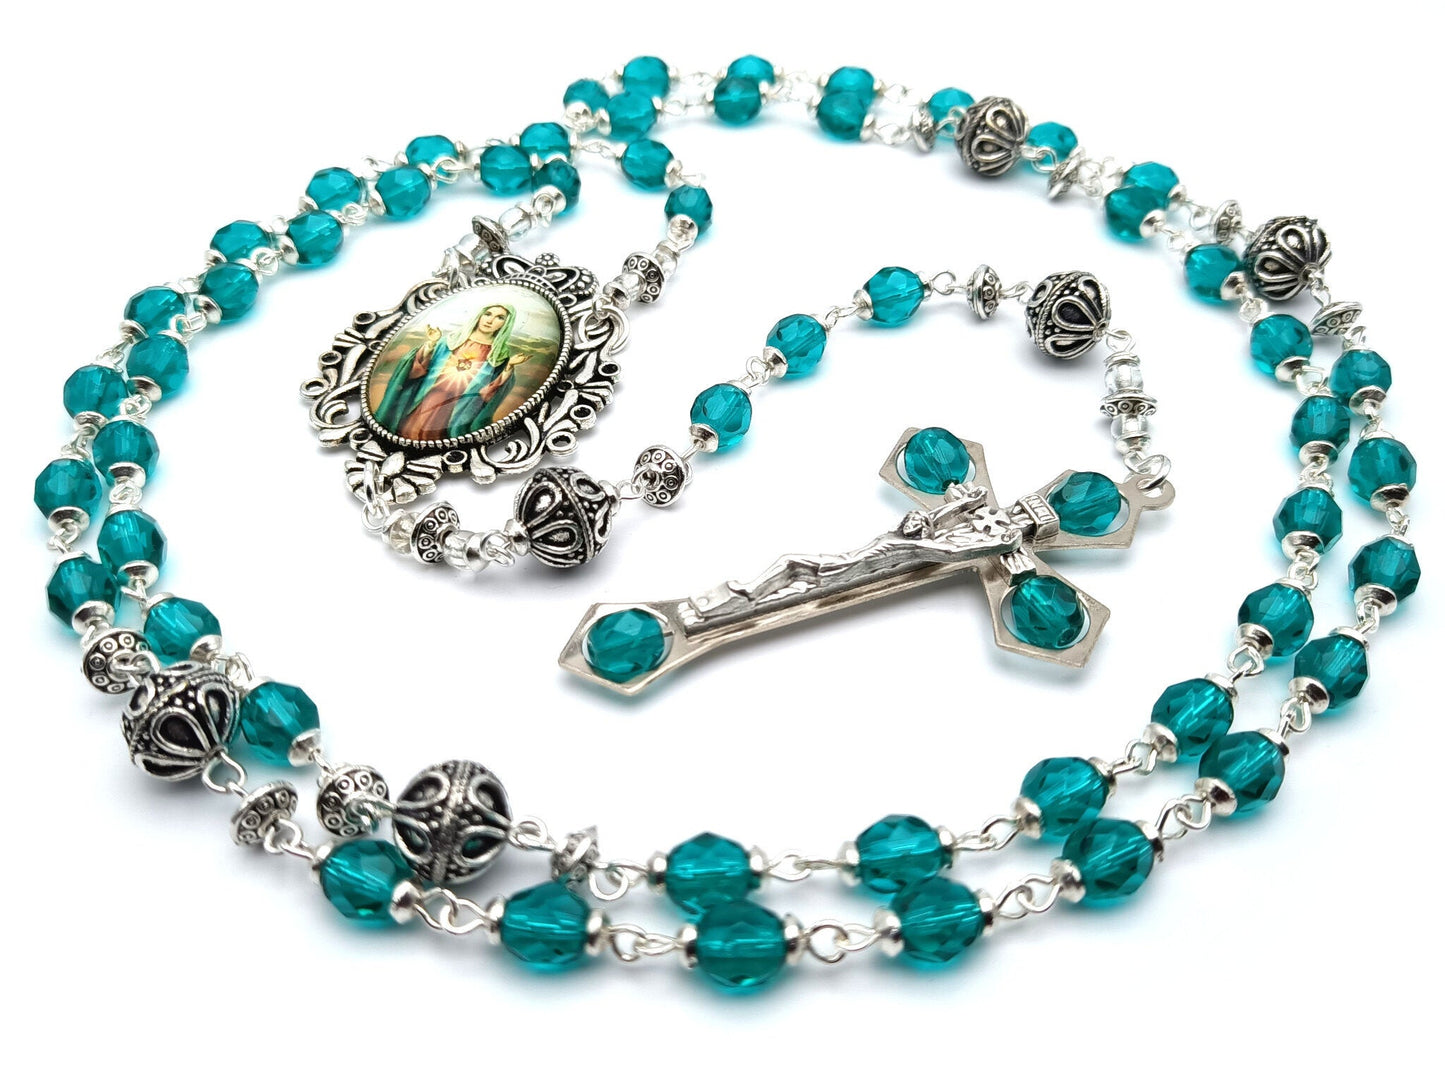 Immaculate Heart of Mary unique rosary beads with aqua crystal and silver beads, silver and crystal crucifix, and silver picture centre medal.